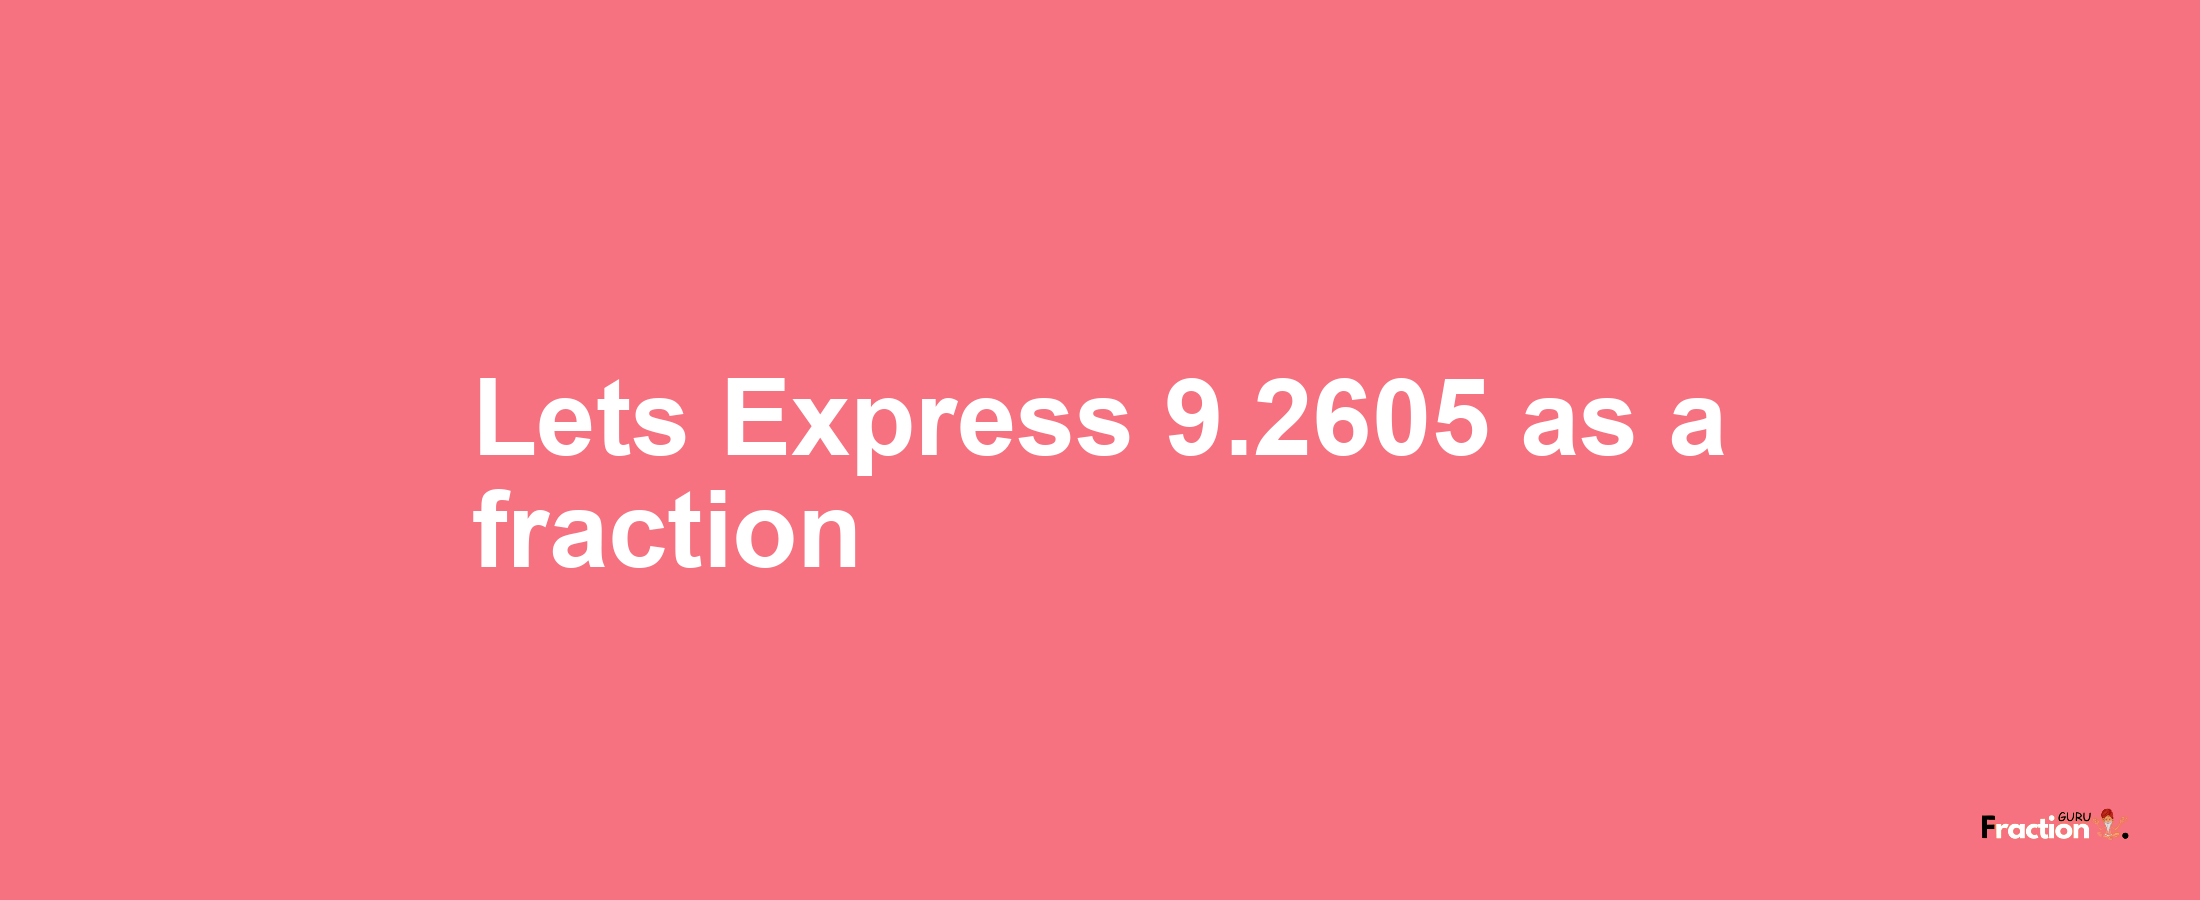 Lets Express 9.2605 as afraction